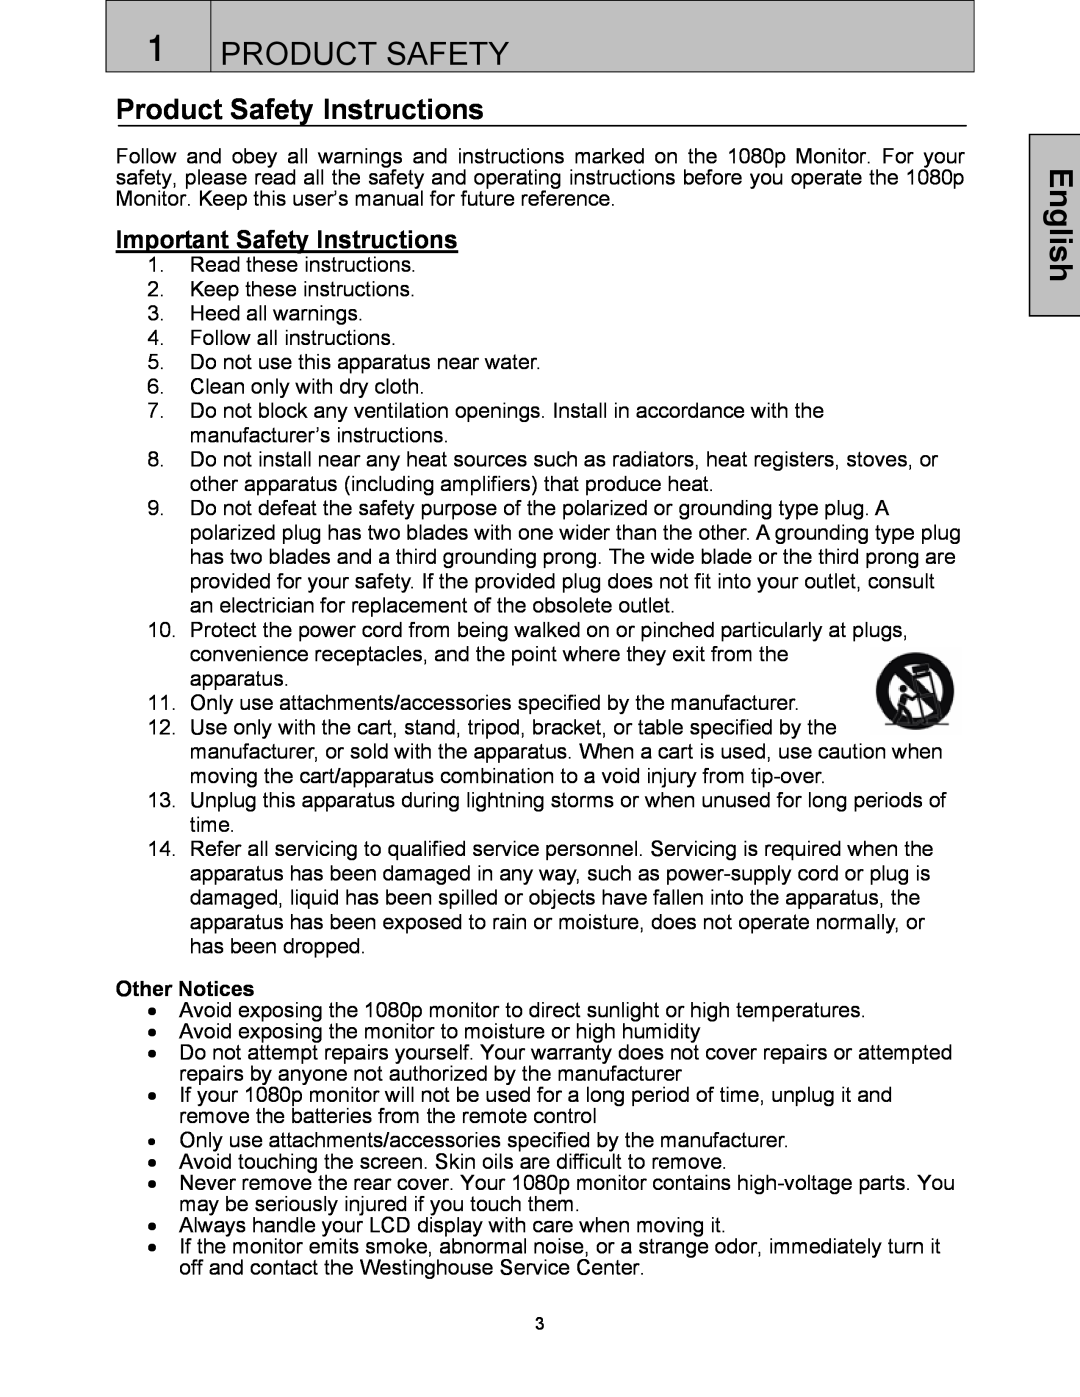 Westinghouse LVM-37w3se user manual Product Safety Instructions, Important Safety Instructions, English 